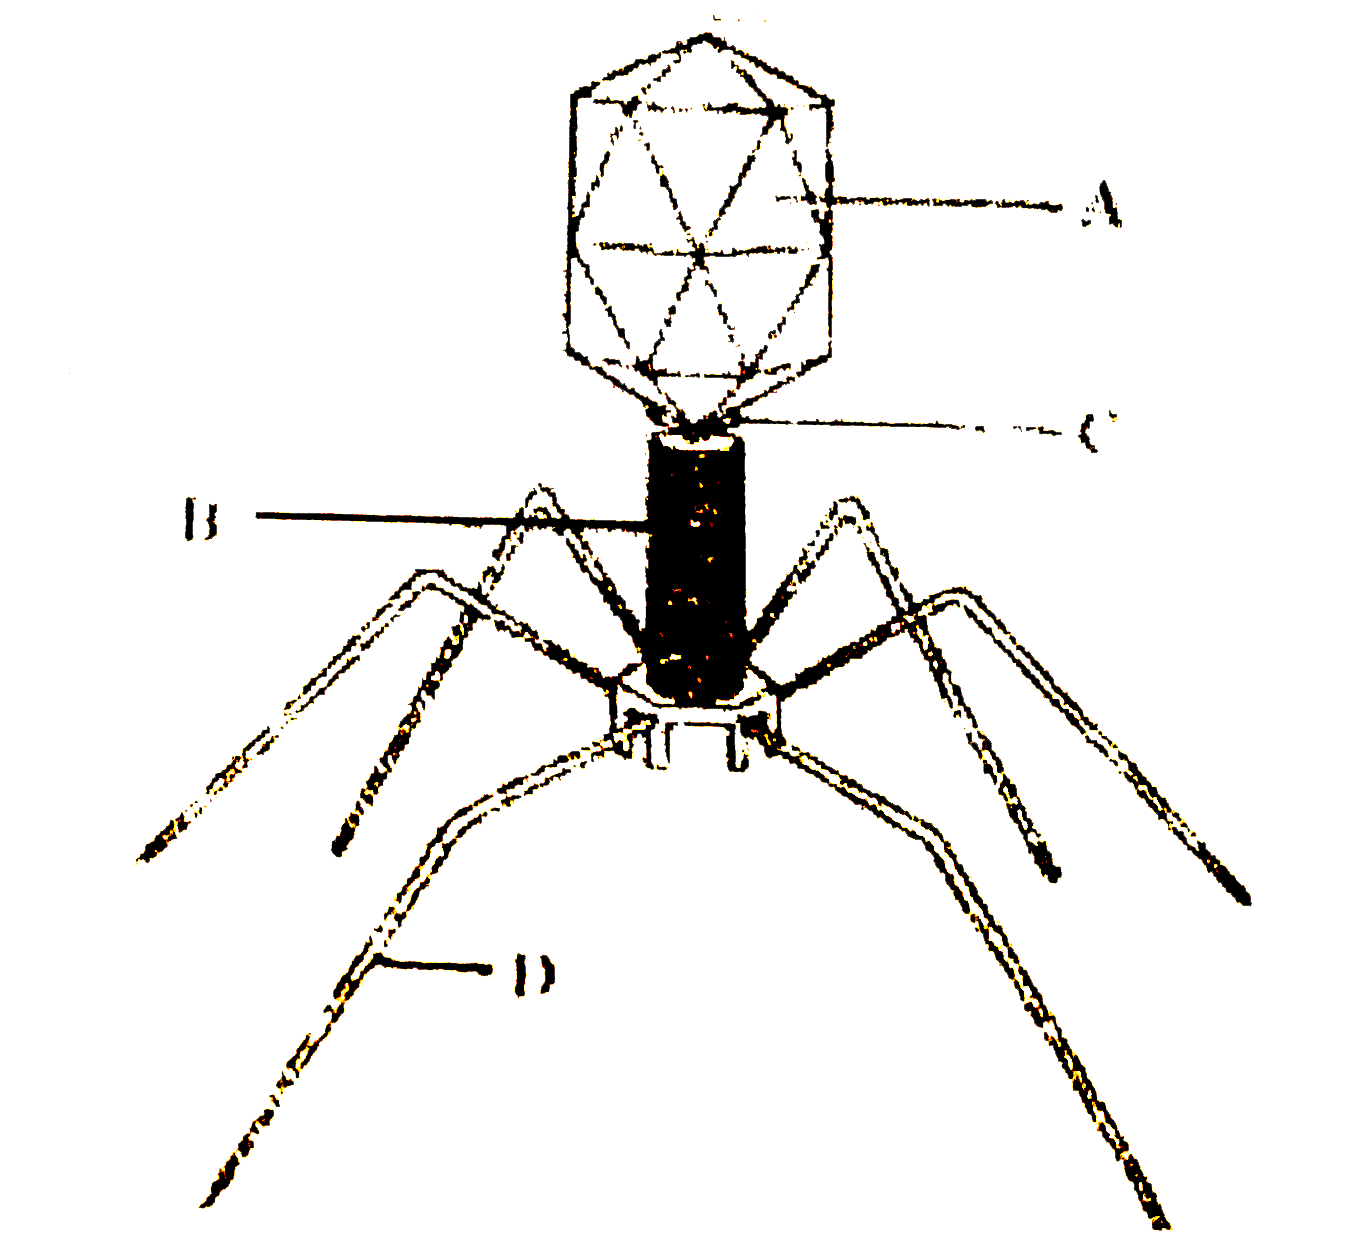 Given below is the diagram of bacteriophage. In which one of the options all the four parts A,B,C and D are correct?